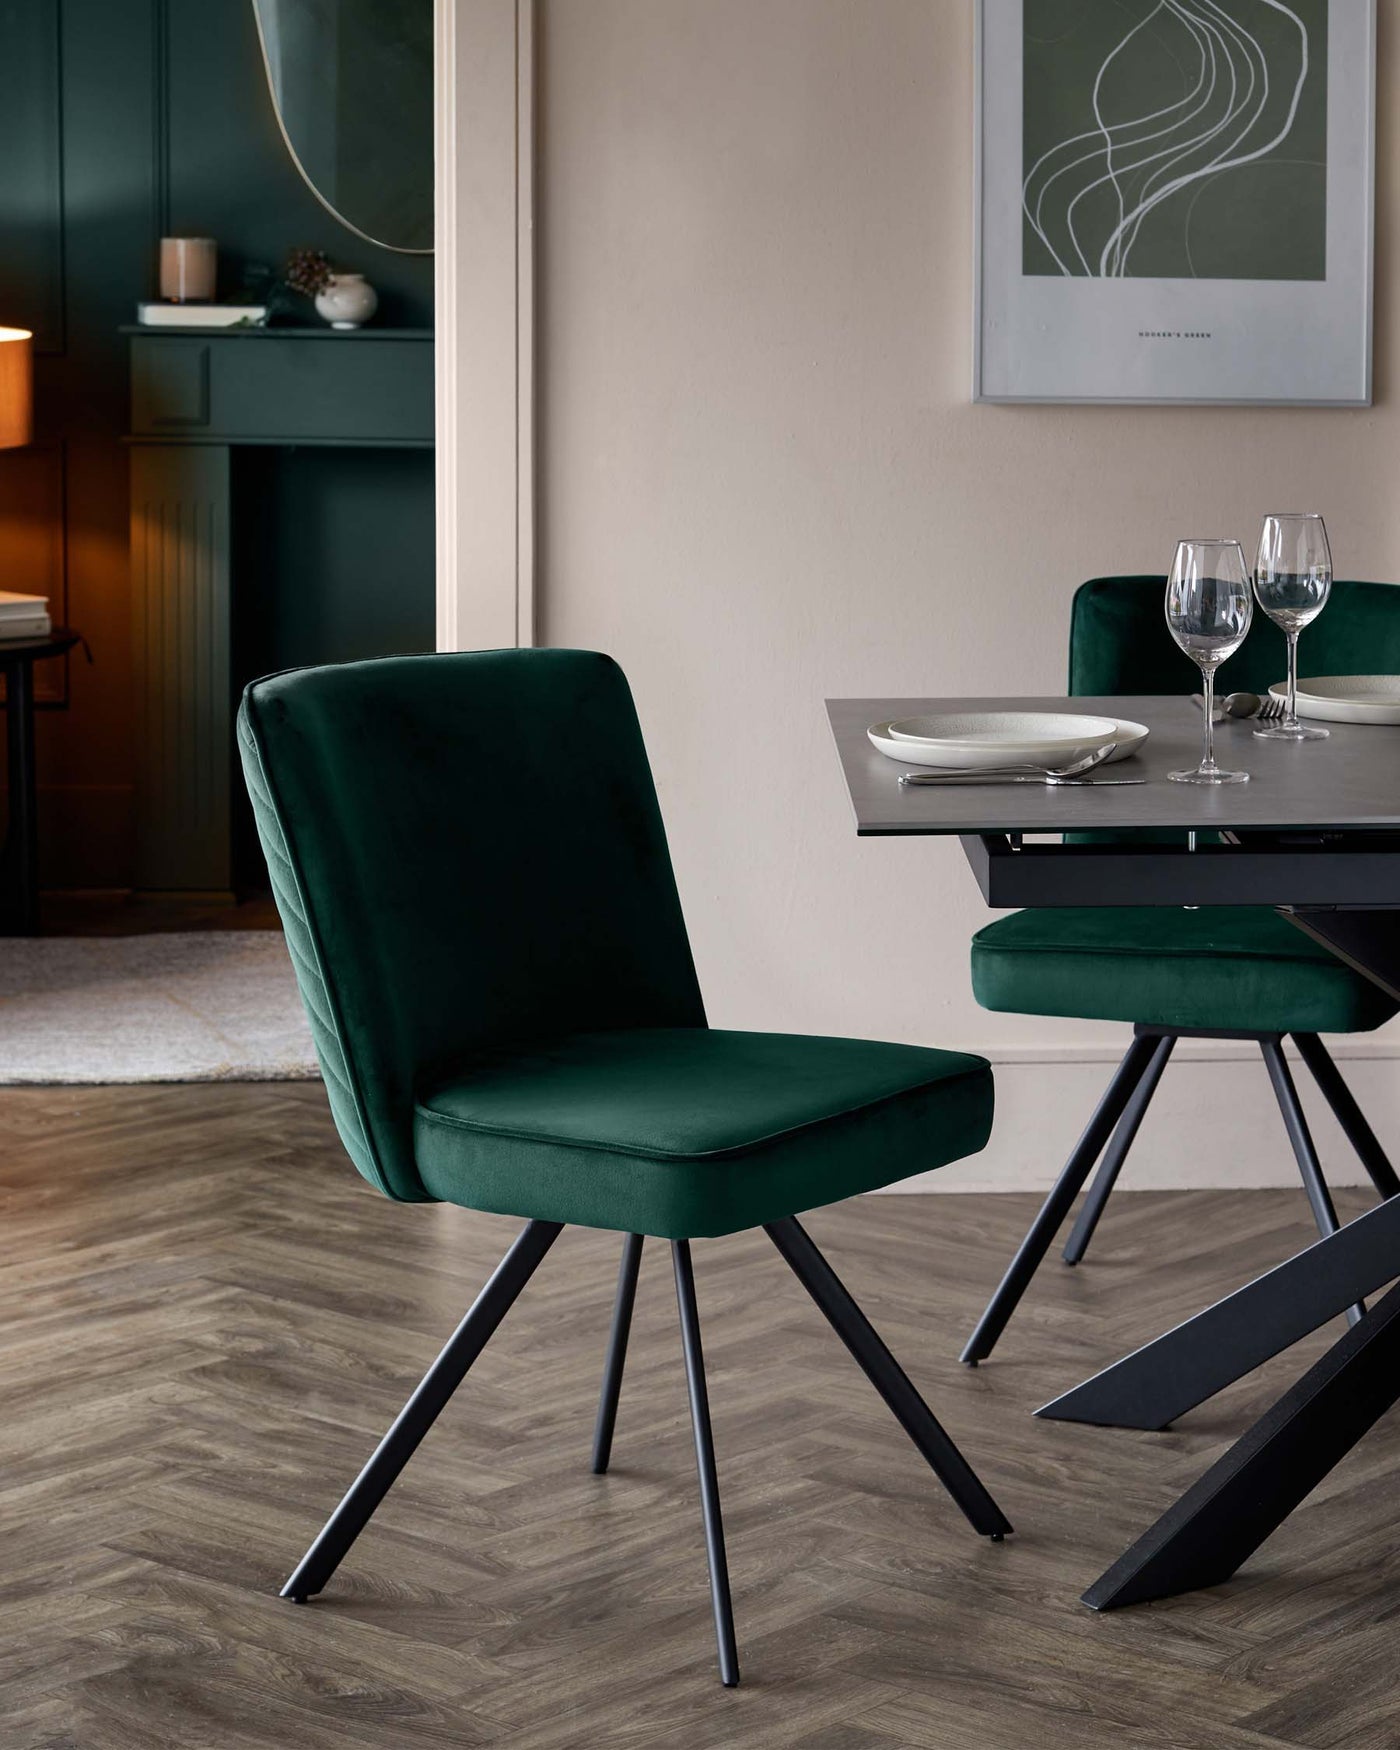 Plush green velvet dining chair with a sleek, vertical tufted backrest and cushioned seat, resting on angled black metal legs. Contemporary dark-toned wooden dining table with geometric black metal base, partially visible. Two clear wine glasses sit on the table, suggesting a refined dining setup.